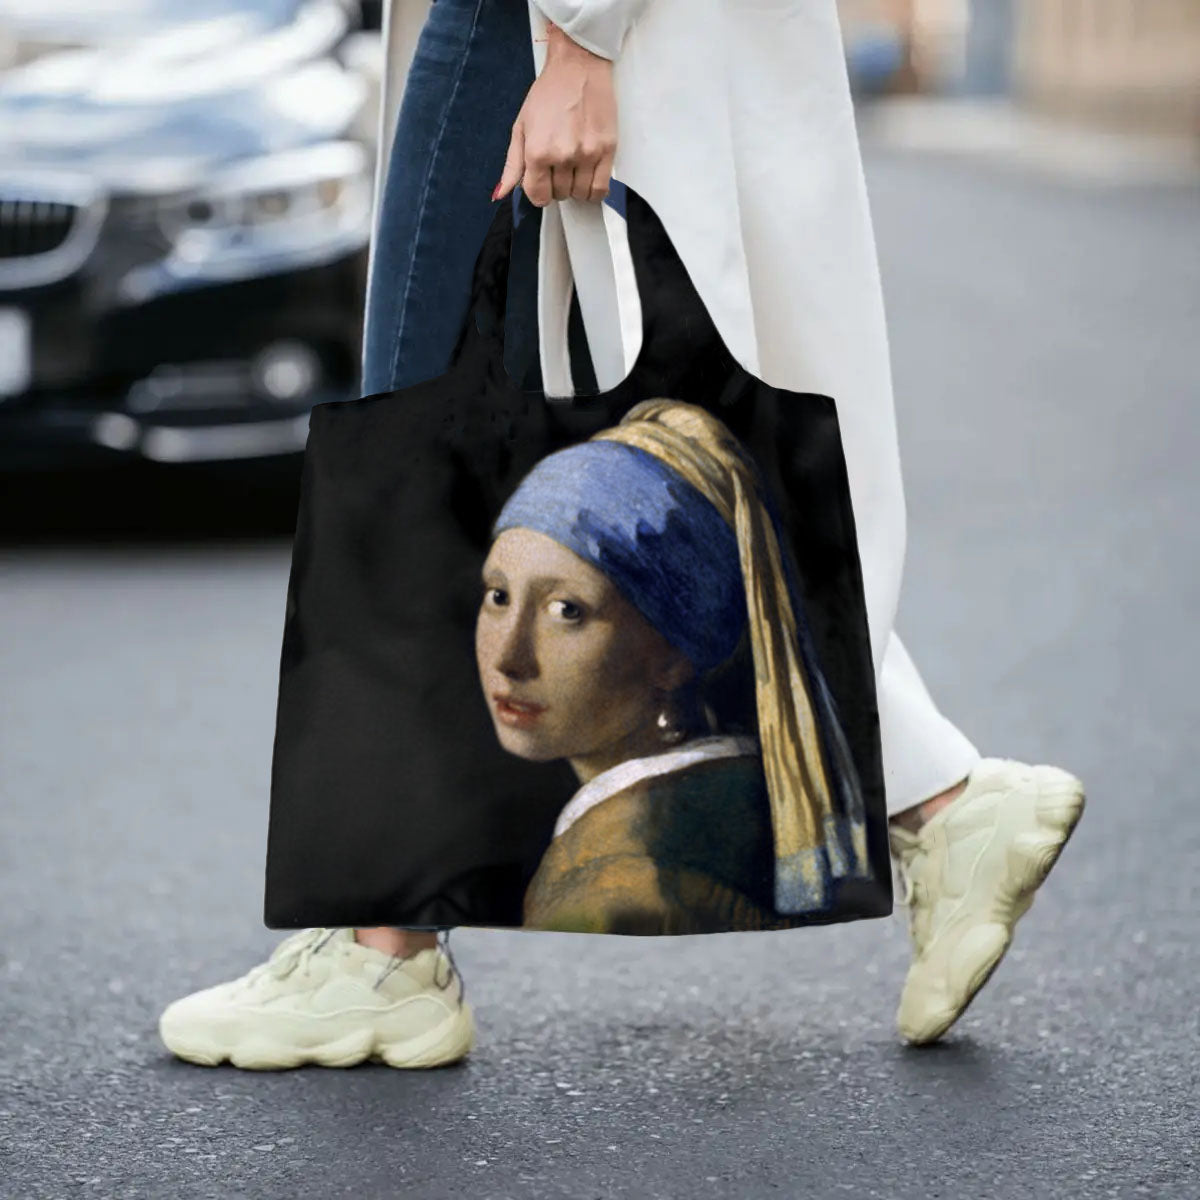 Vermeer, Girl with a Pearl Earring, foldable shopping bag